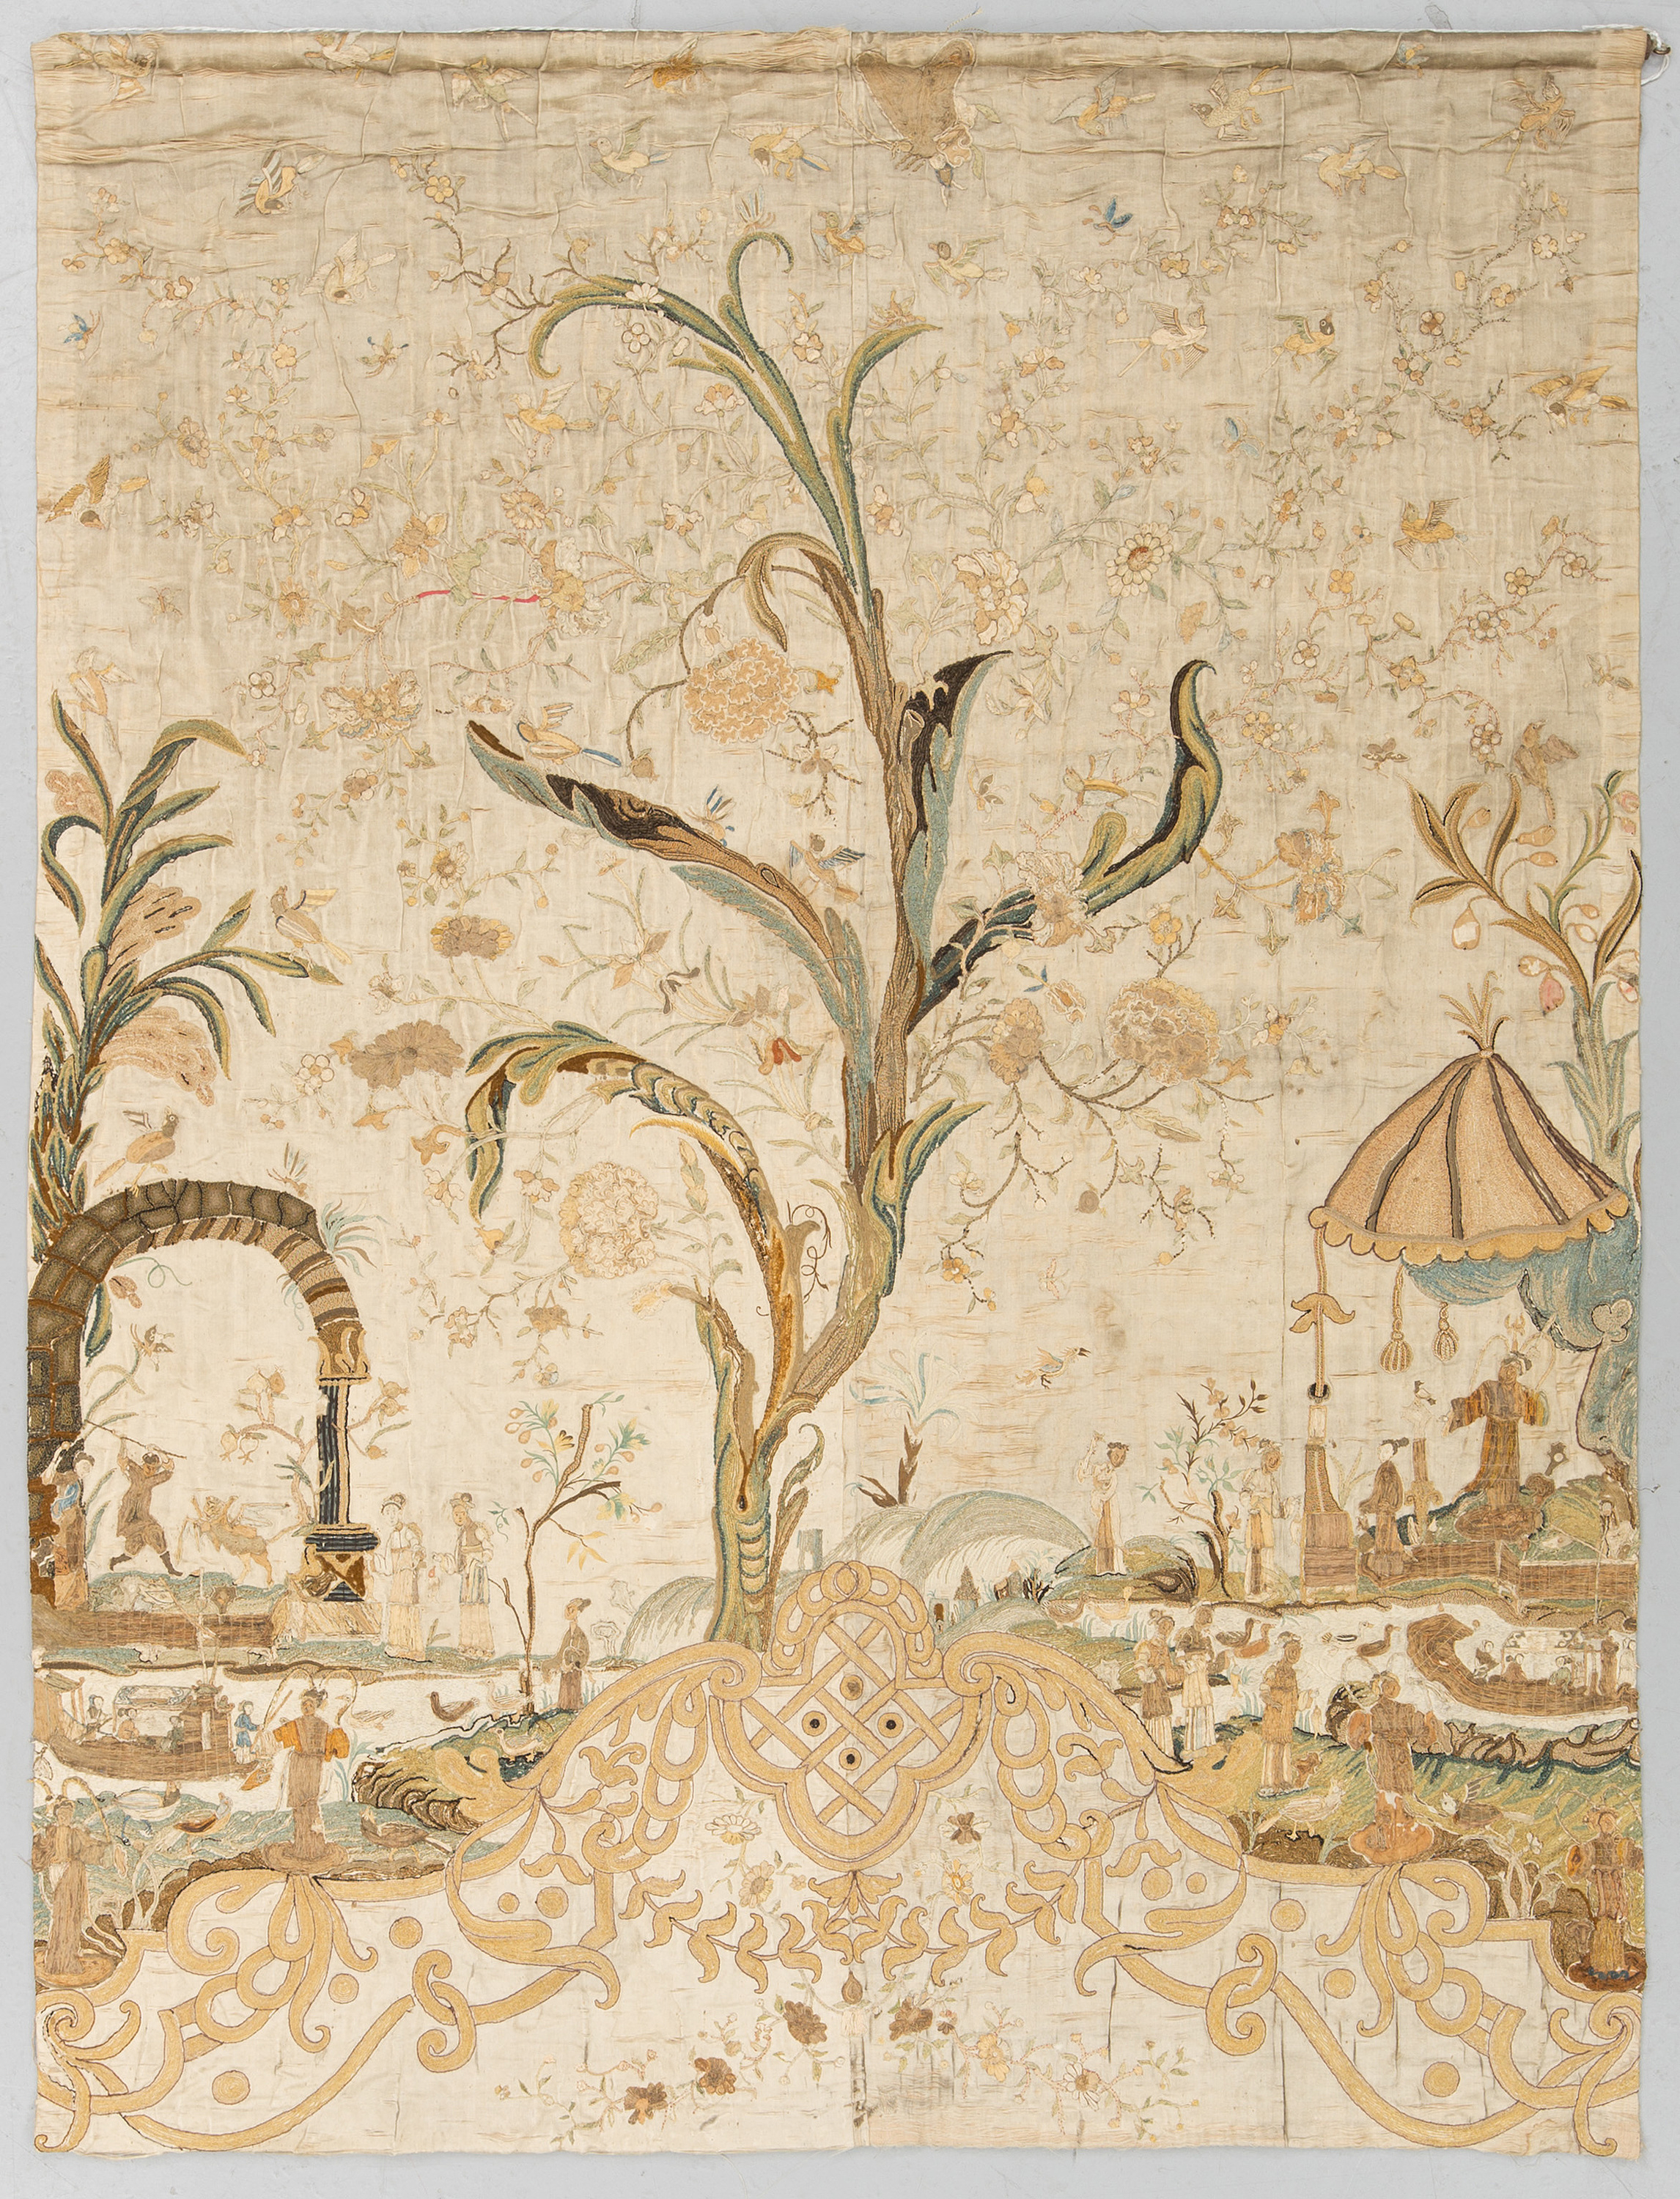 18Th Century Embroidery Patterns An Embroidery Franceengland 18th Century Ca 179 X 1345 Cm